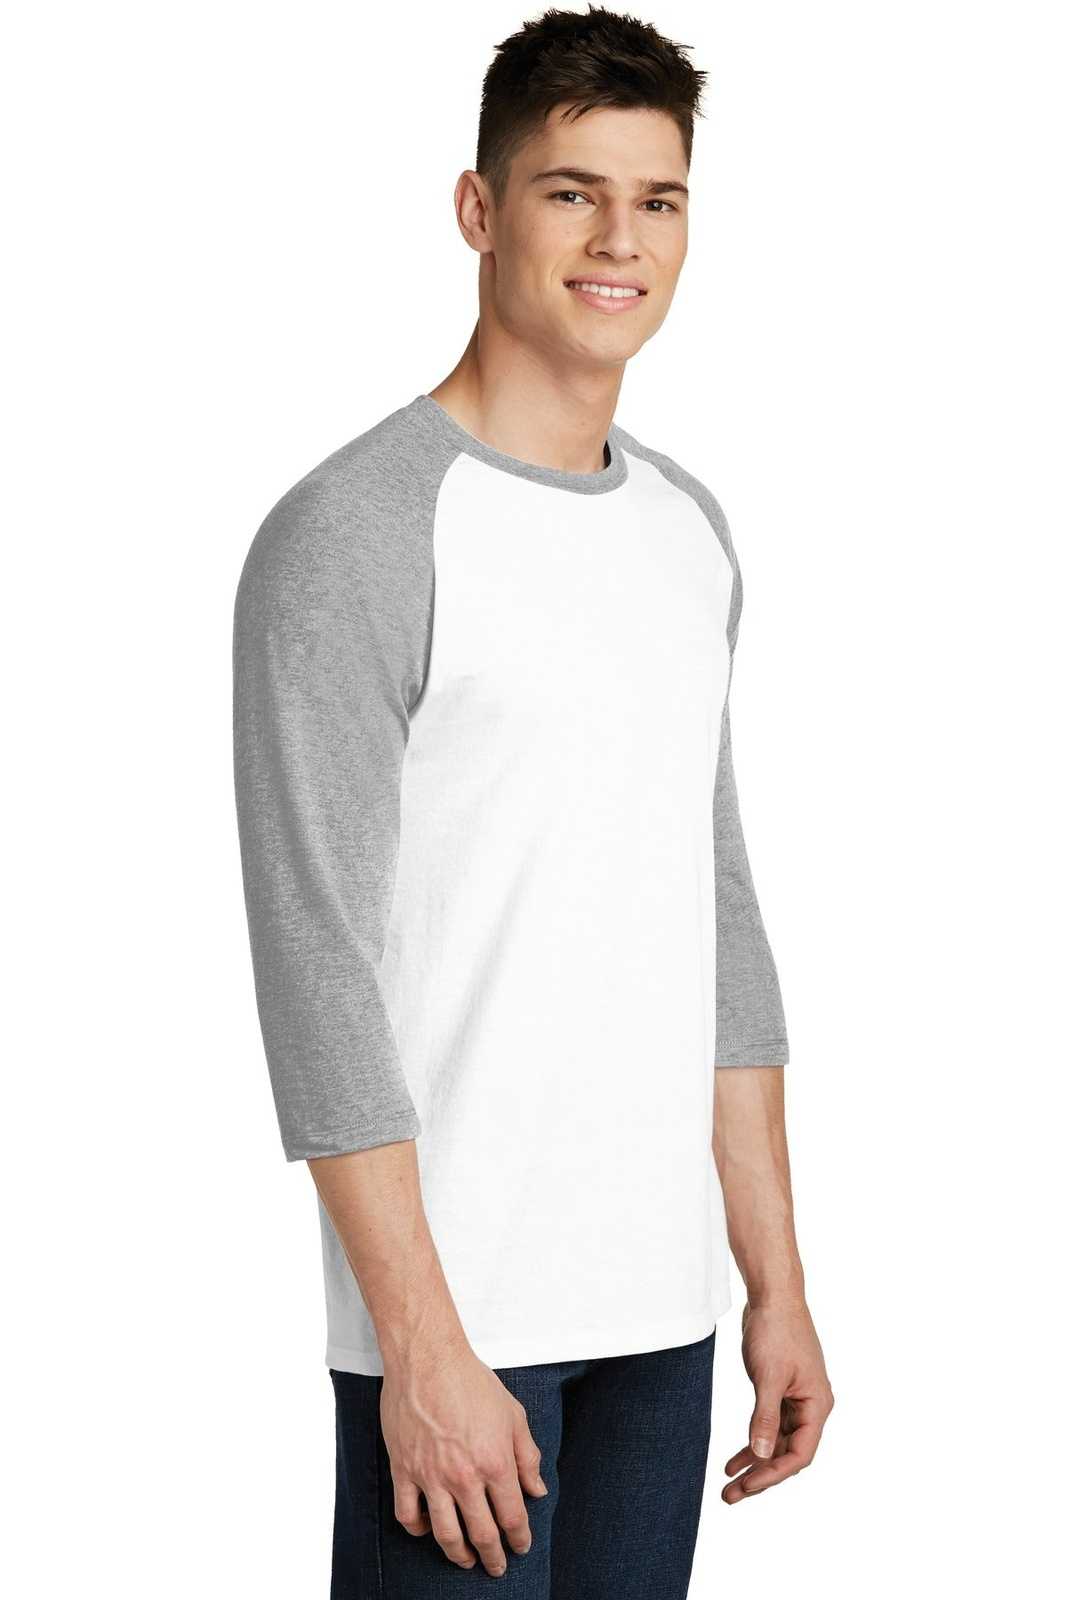 District DT6210 Very Important Tee 3/4-Sleeve Raglan - Light Heather Gray White - HIT a Double - 4